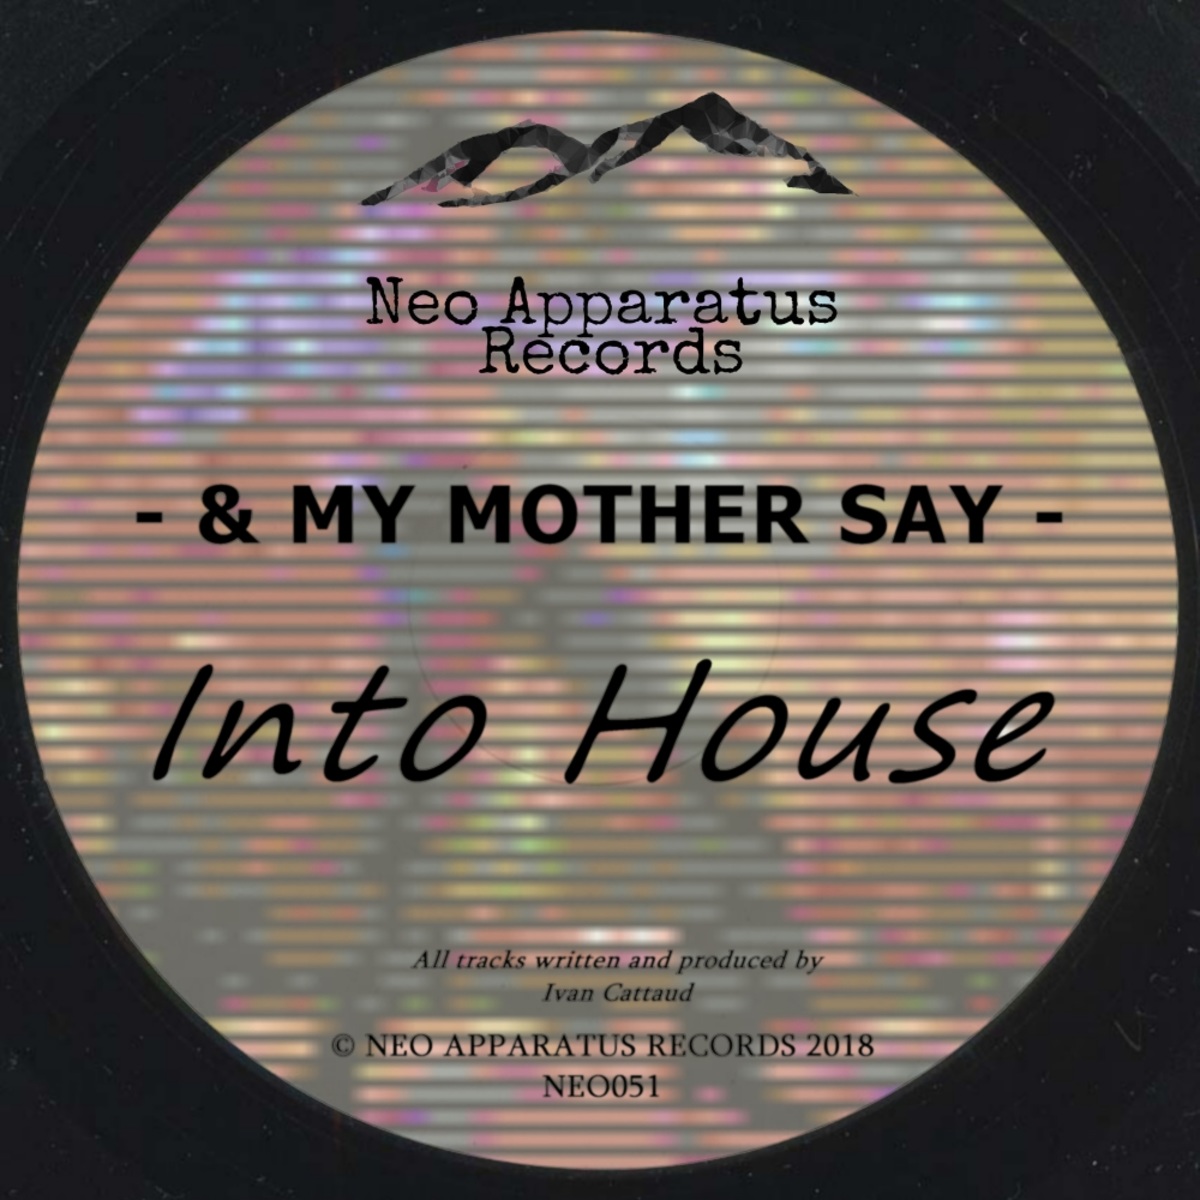 & My Mother Say - Into House / Neo apparatus